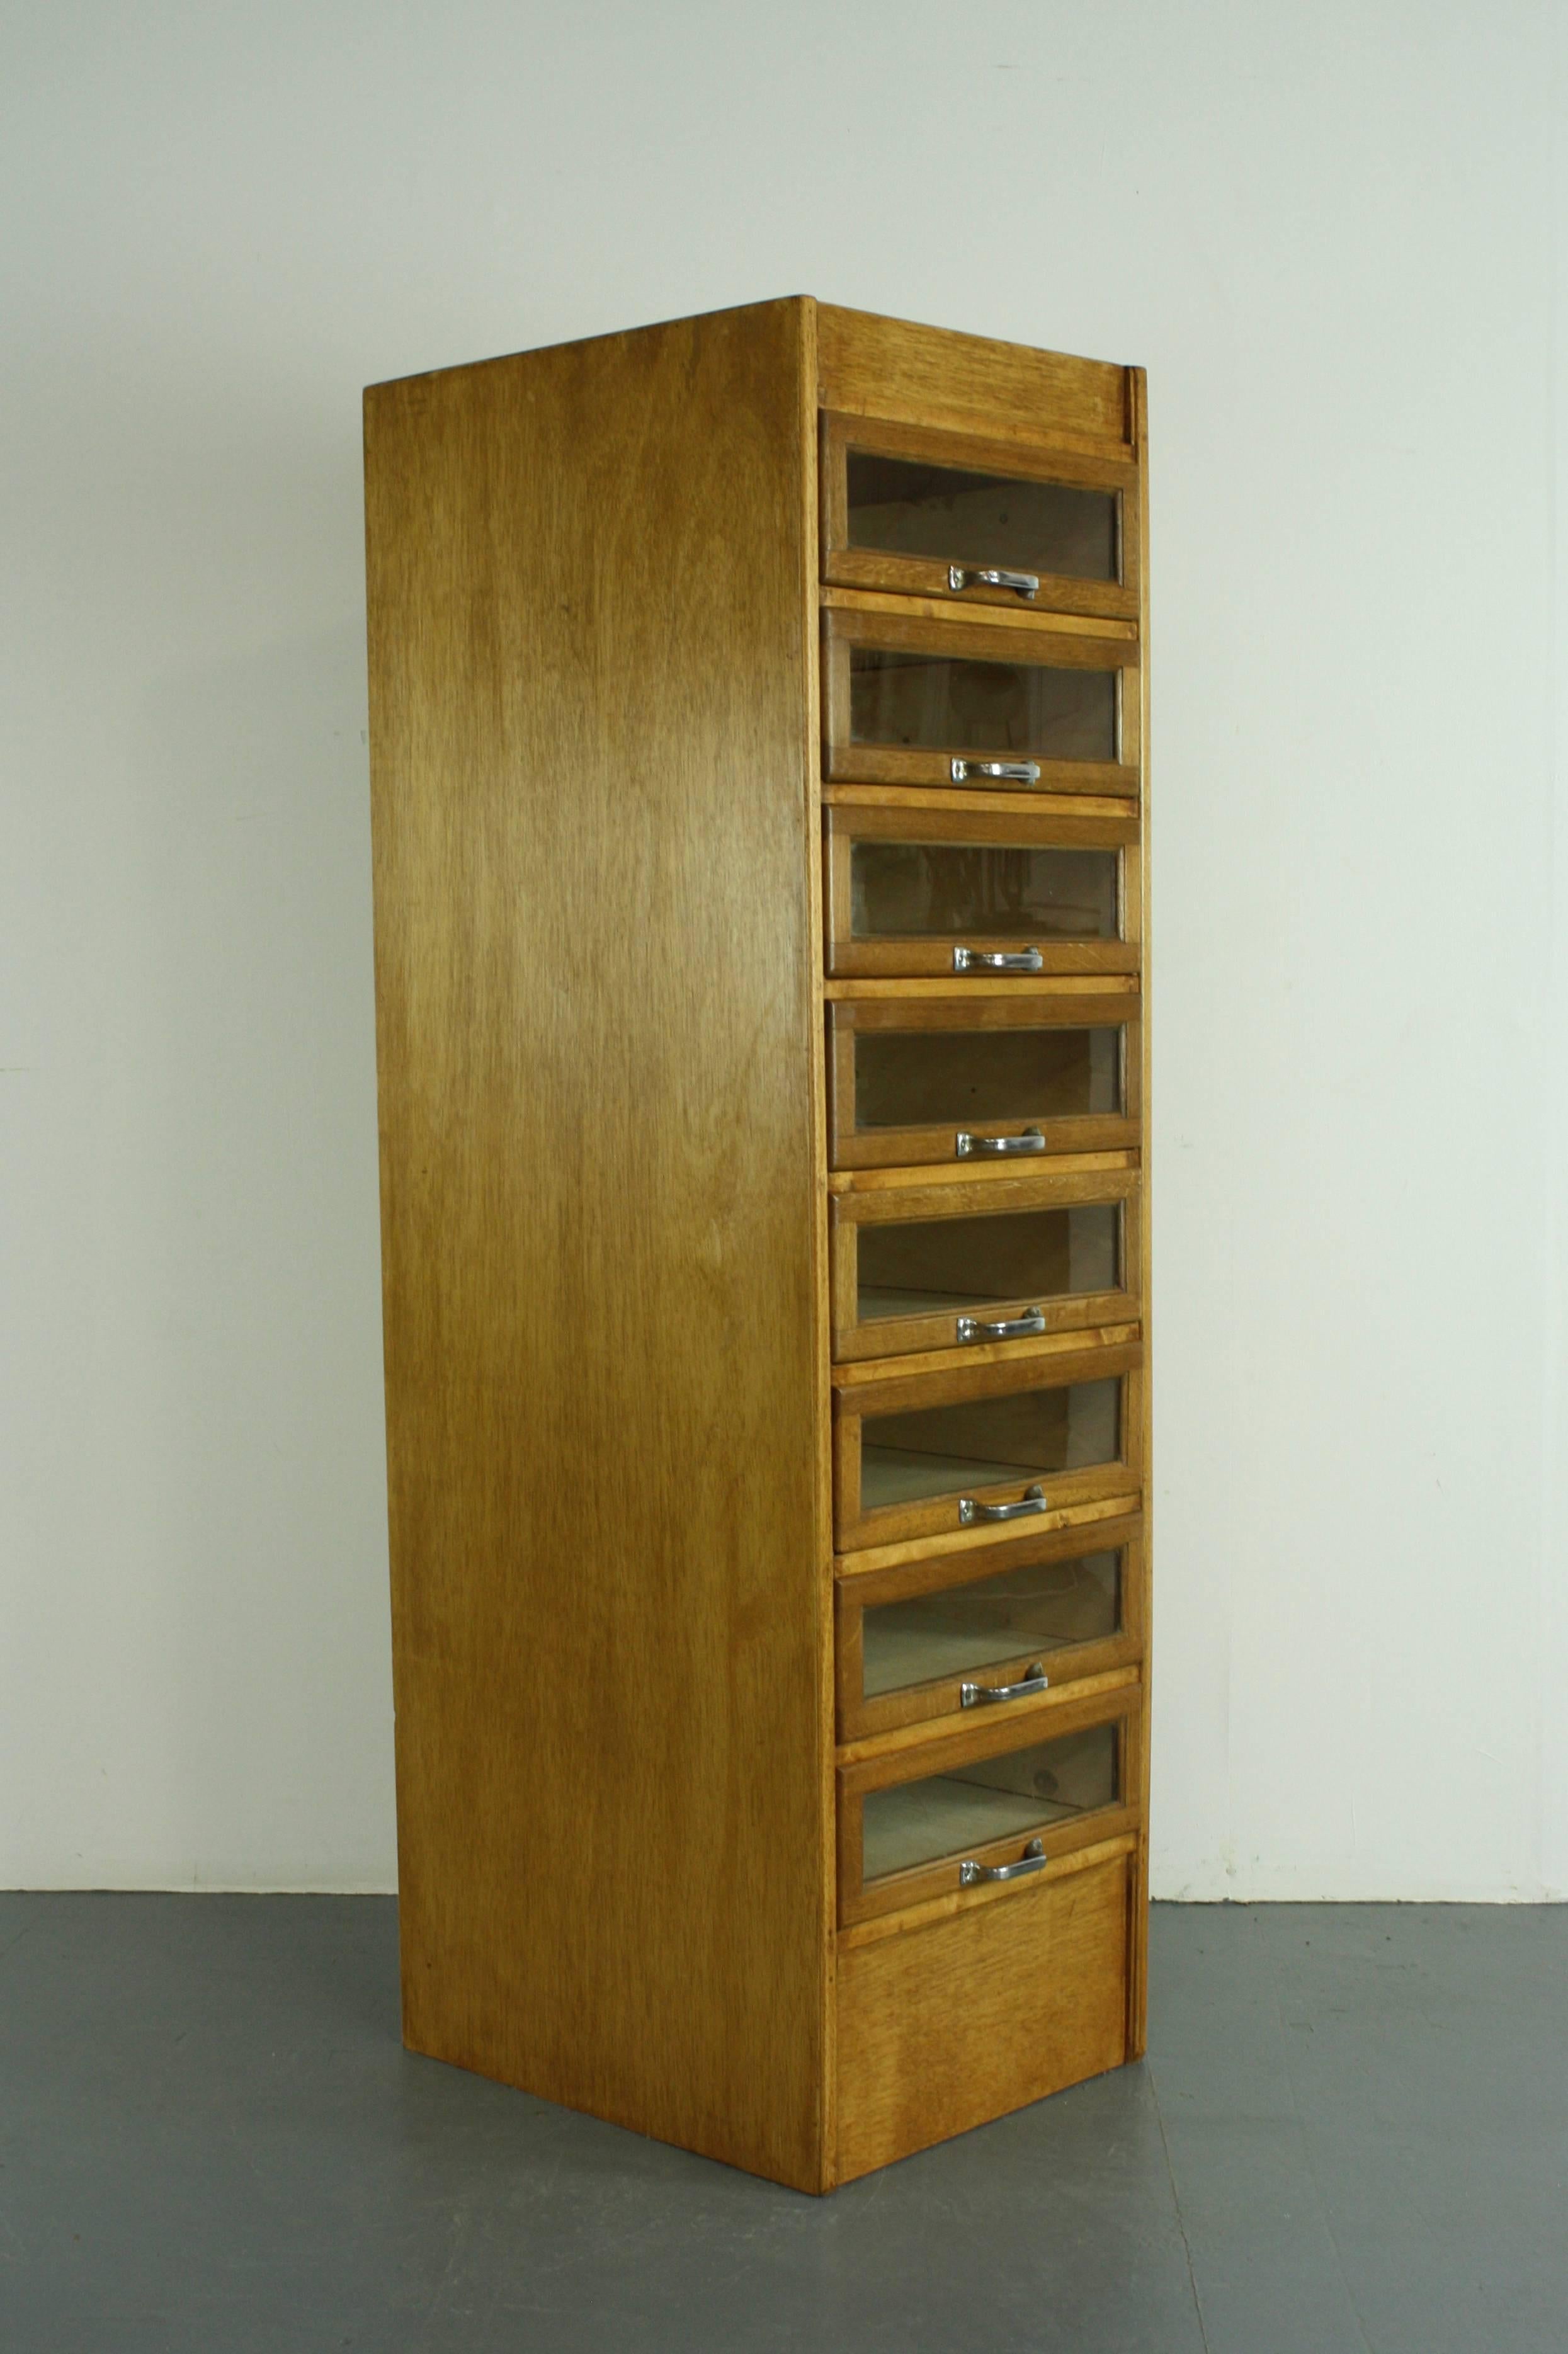 Eight-drawer single column haberdashery shop cabinet. 

It has eight glass fronted drawers, all with metal D handles.

Approximate dimensions:

Height: 159.5cm

Width: 46.5cm

Depth: 56.5cm

Drawers: 41cm x 44.5cm x 12.5cm.

Overall,